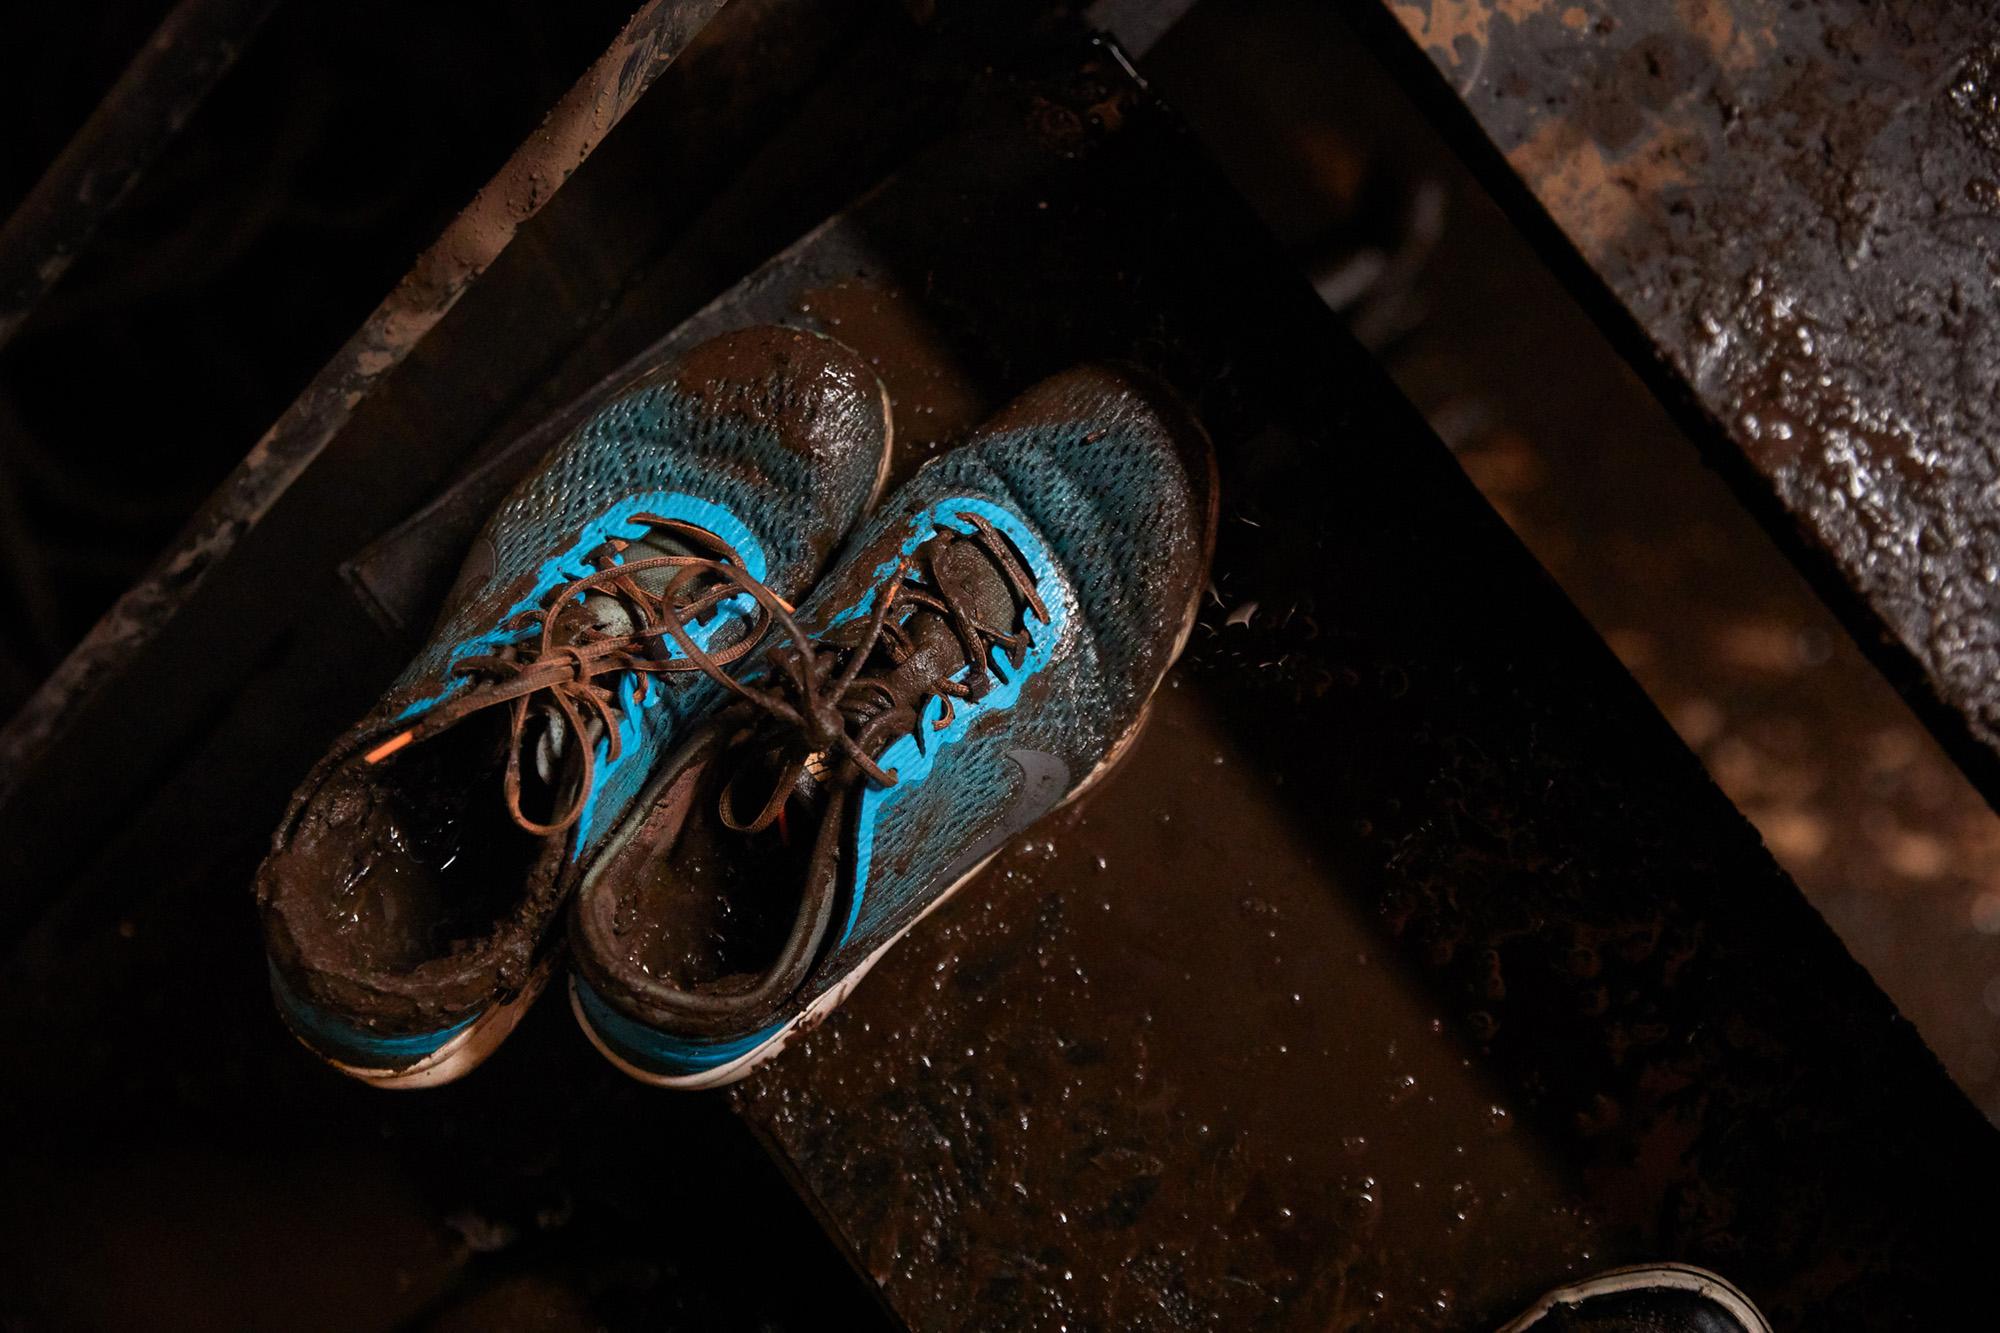 Bloomberg: Landslide in Ecuador's capital - Detail of muddy shoes after a mudslide in Quito, Ecuador,...